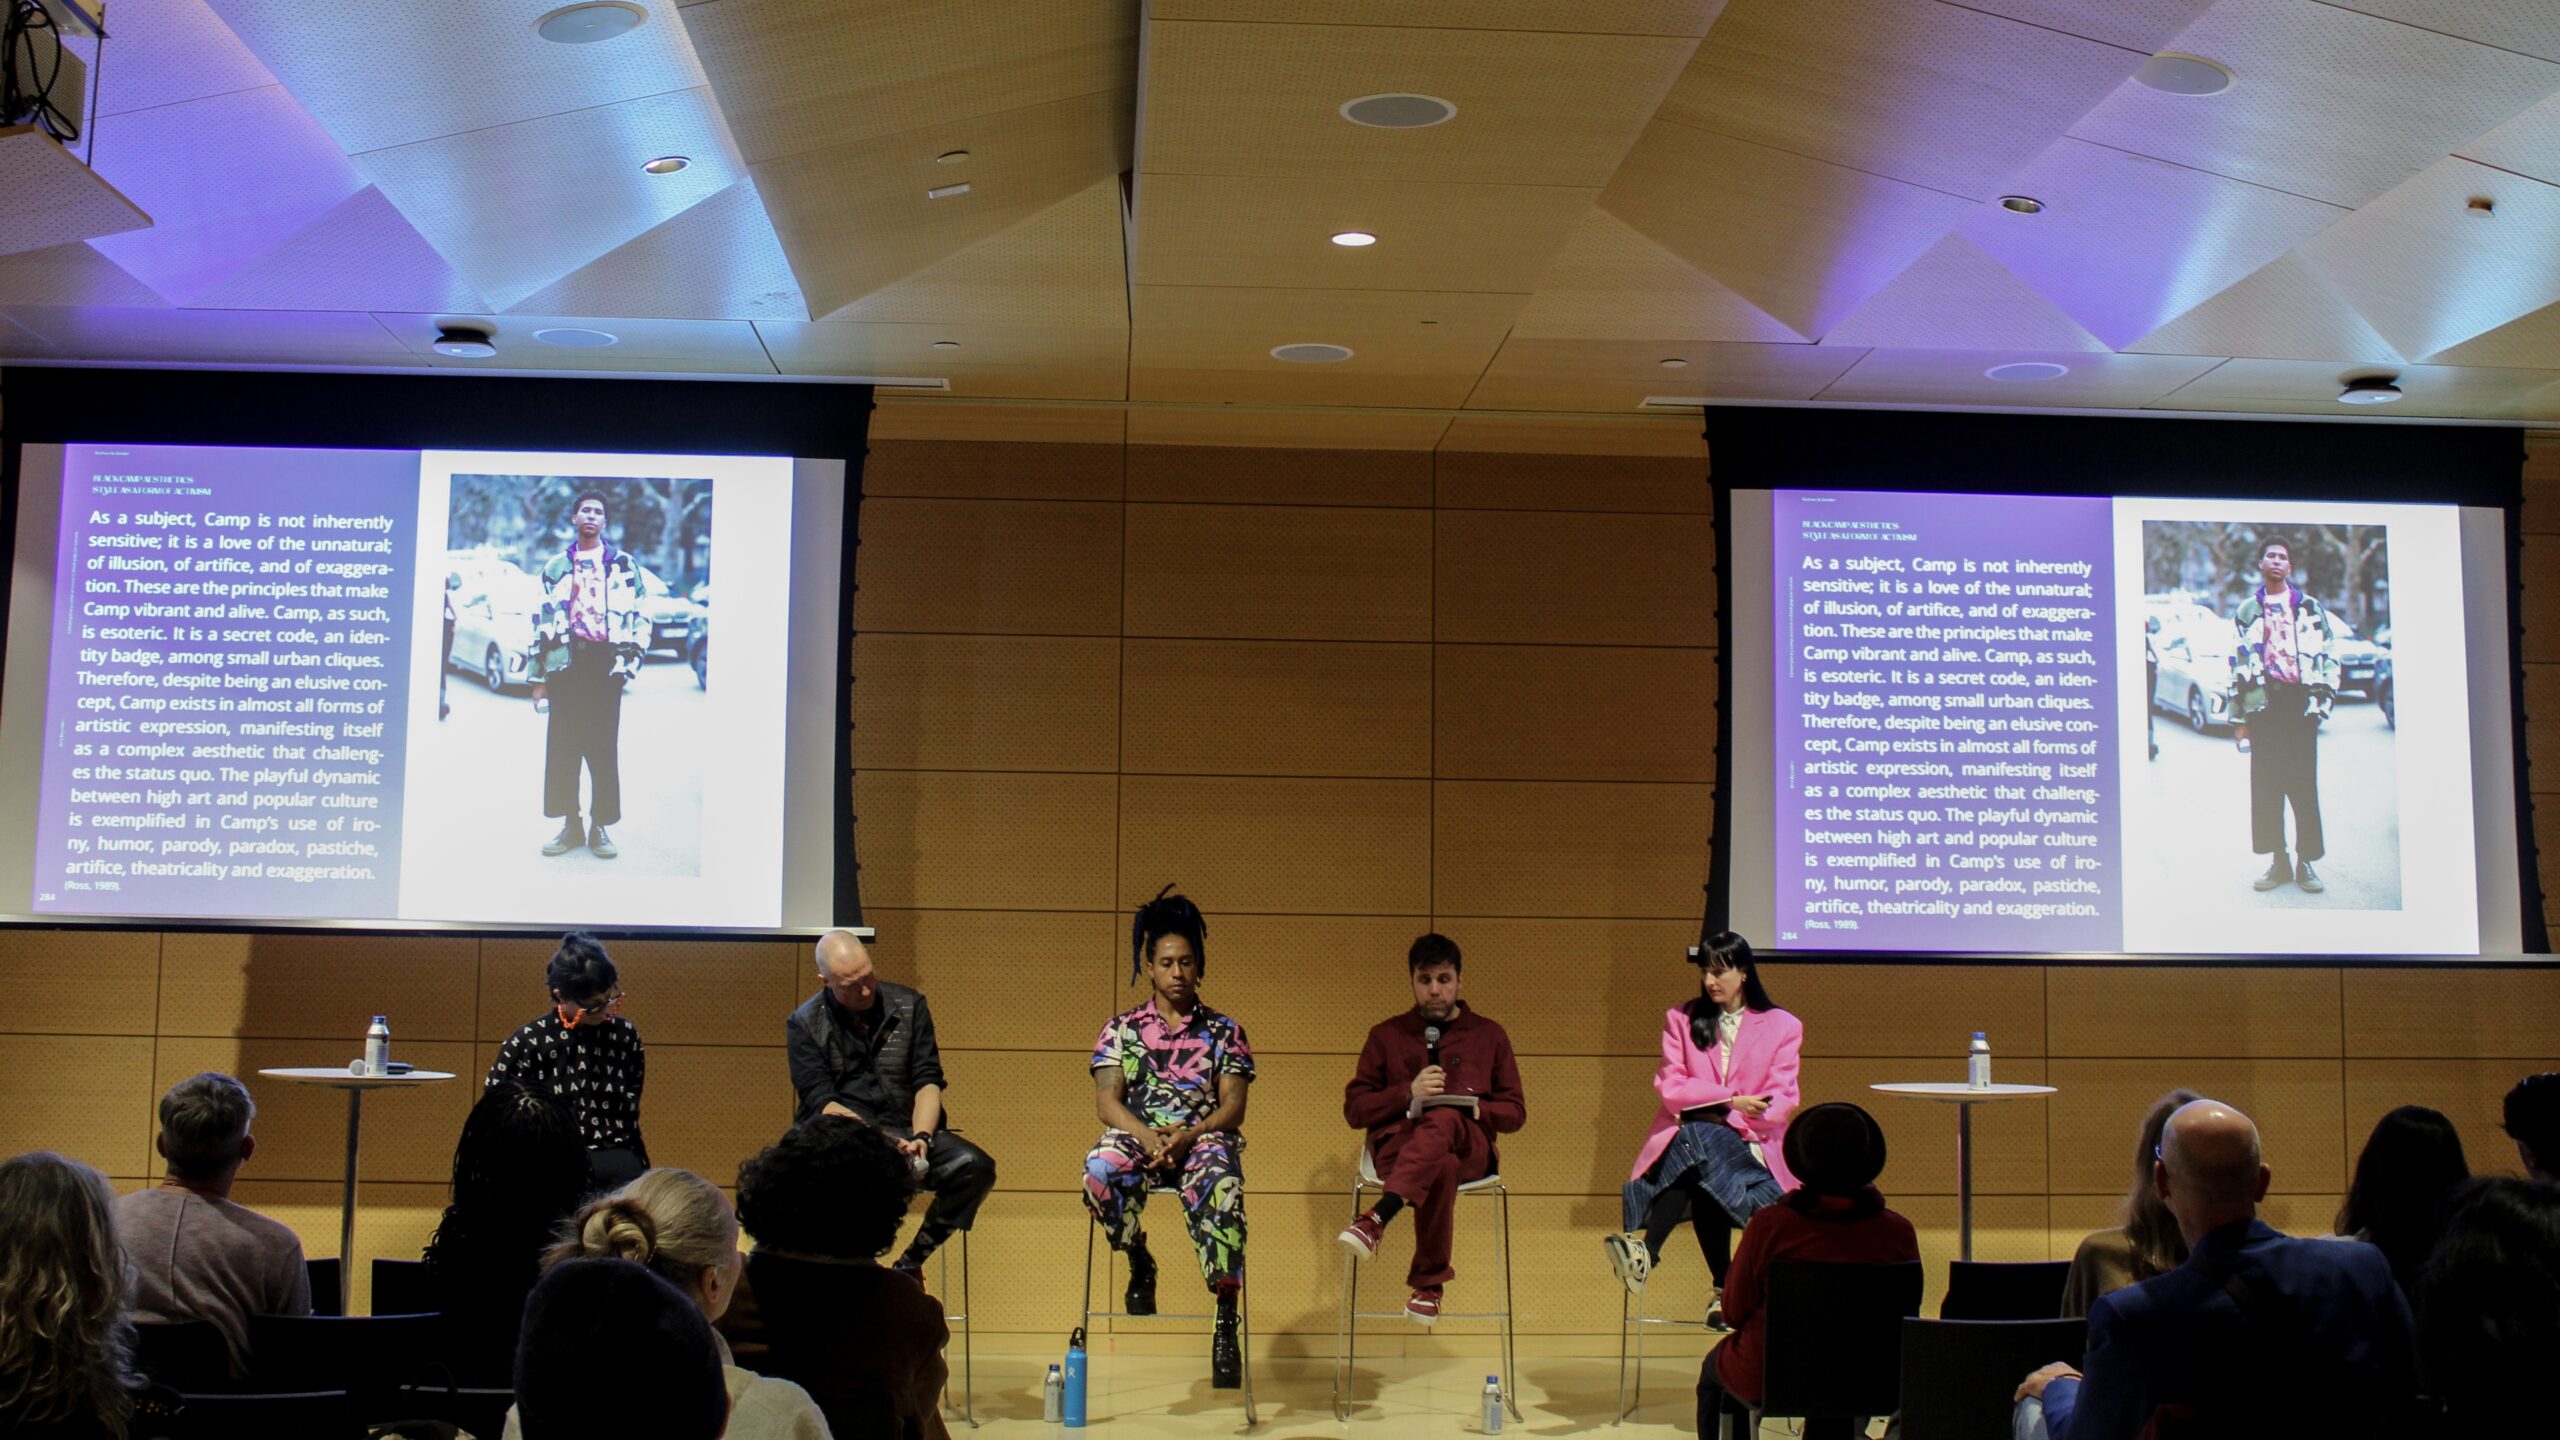 (from left to right) Lucia Cuba, Otto von Busch, MX Oops, Dirk Reynders and Marie Genevieve Cyr sit side-by-side on stage in the Starr Foundation Hall as they speak to an audience. Behind them are two large screens with an excerpt from “Fashion+.”